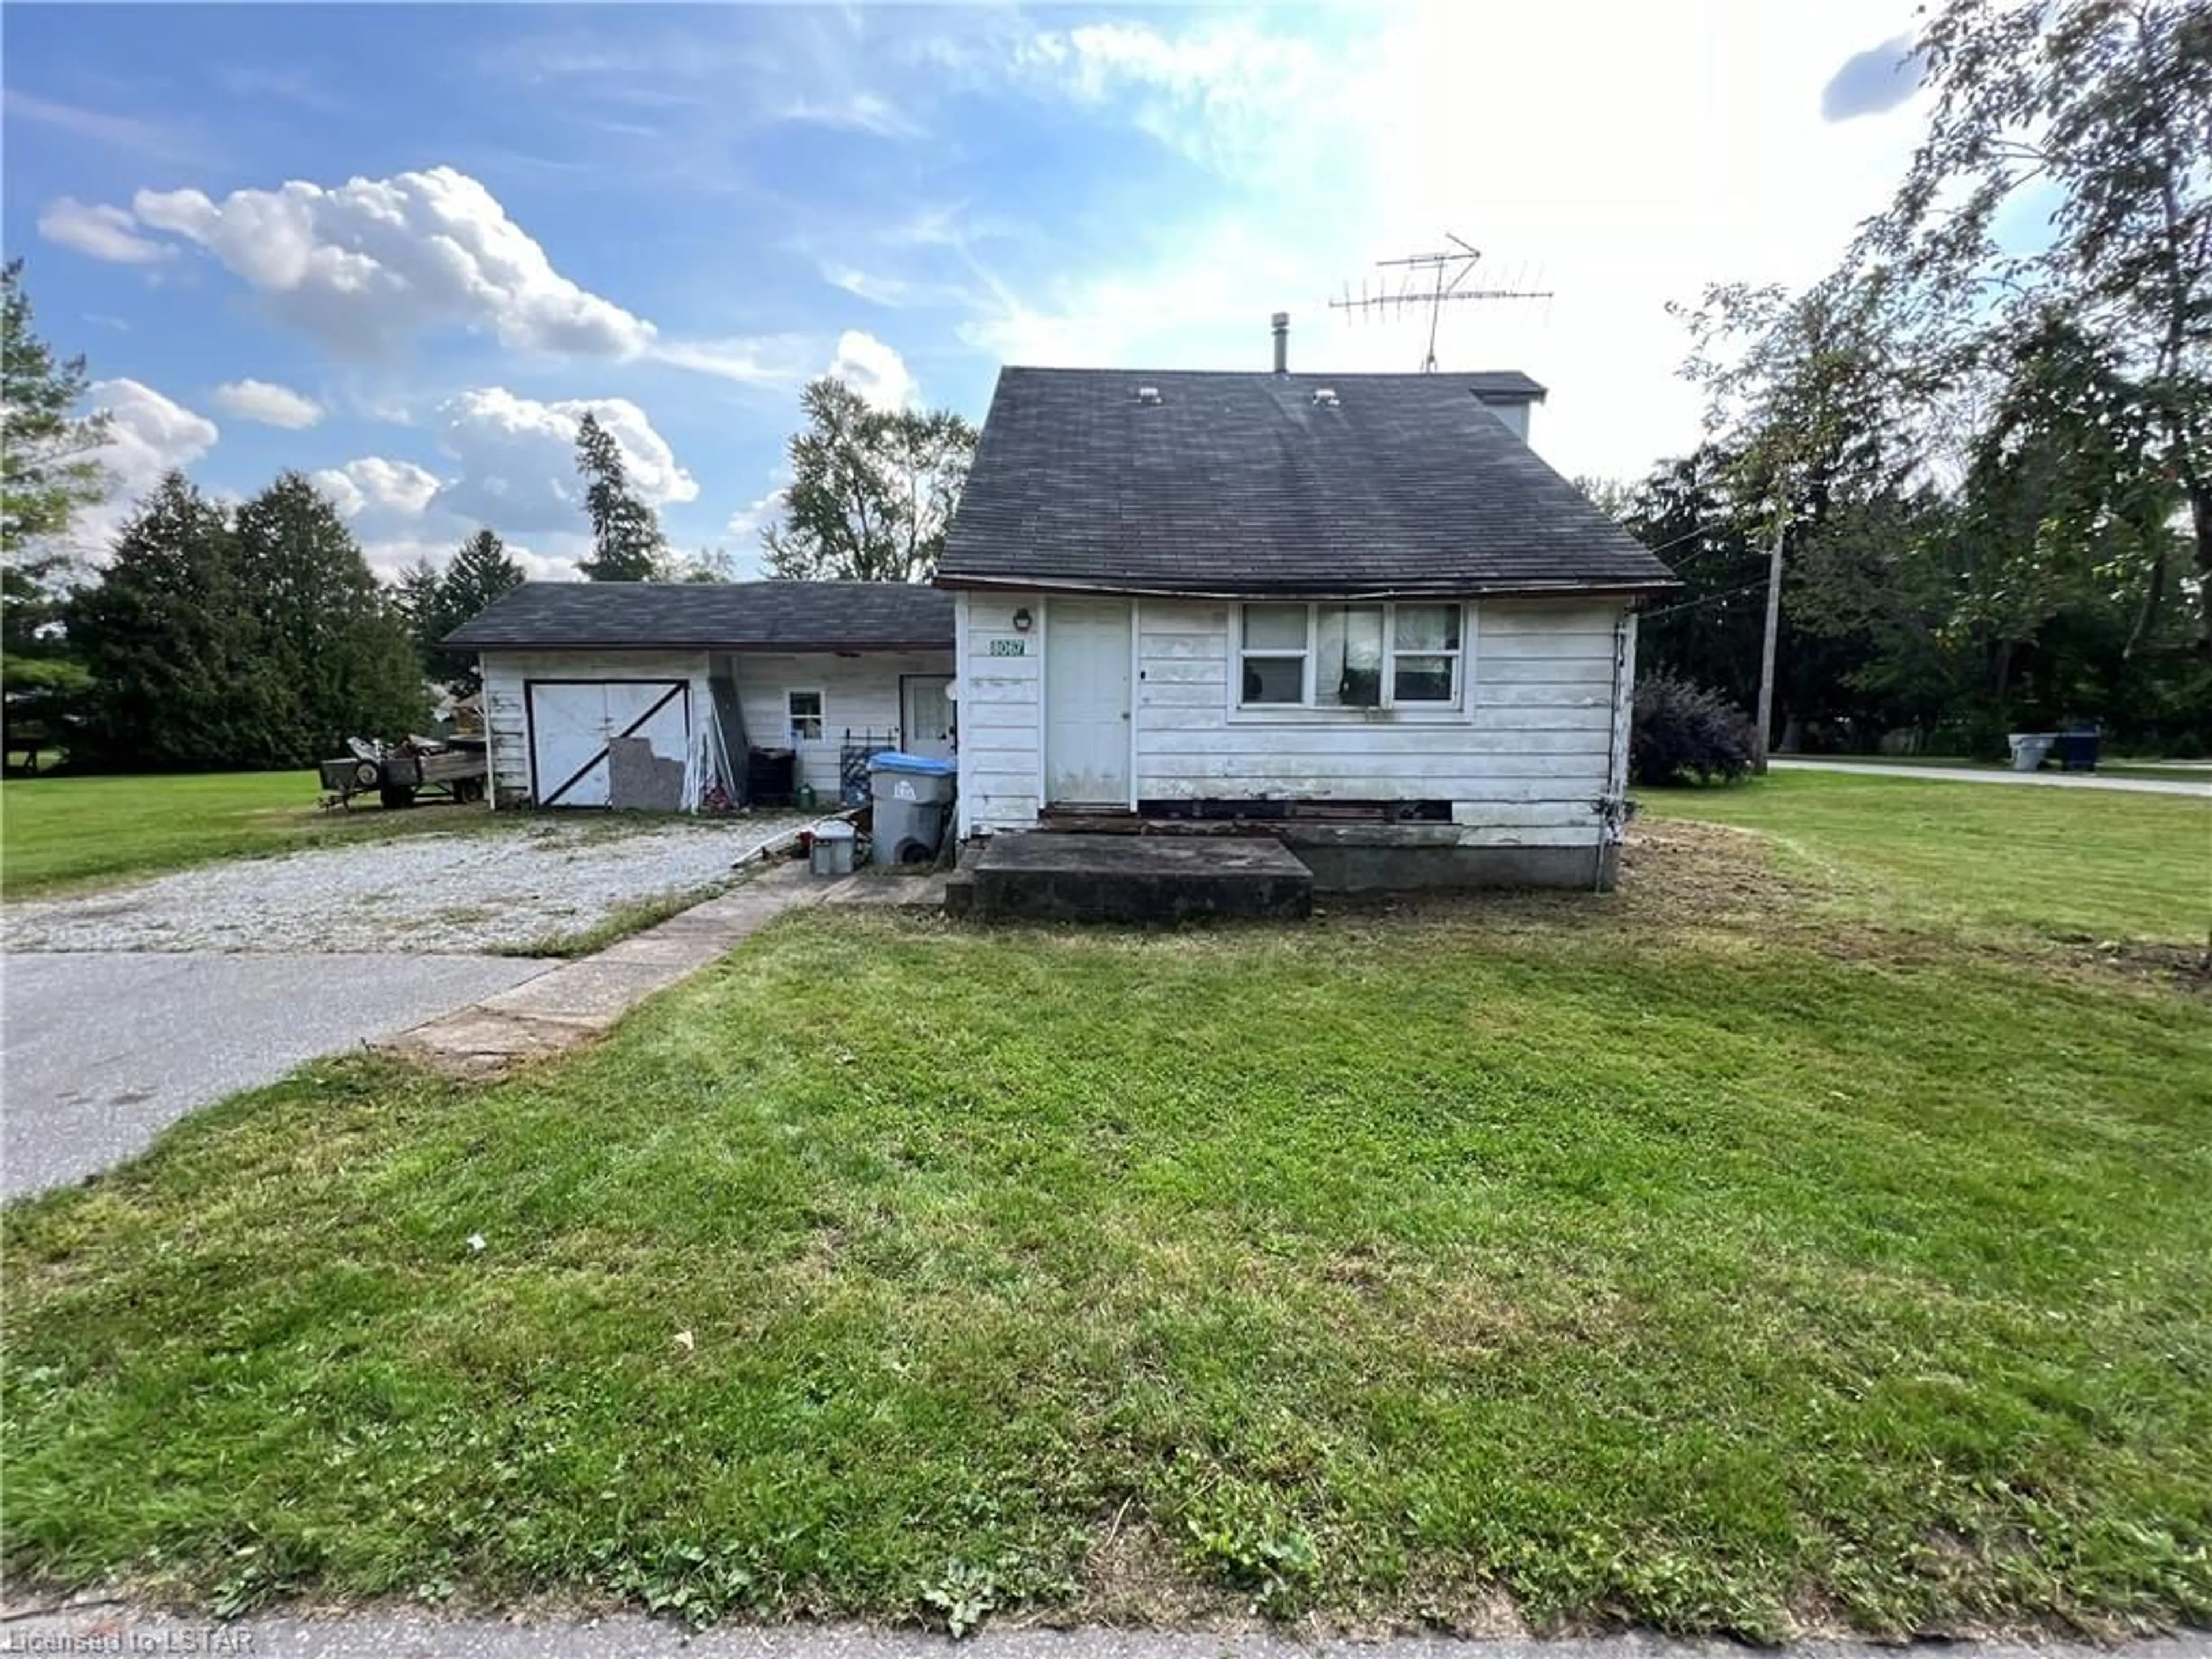 Frontside or backside of a home for 8067 Lorne Ave, Adelaide-Metcalfe Ontario N0N 1A0